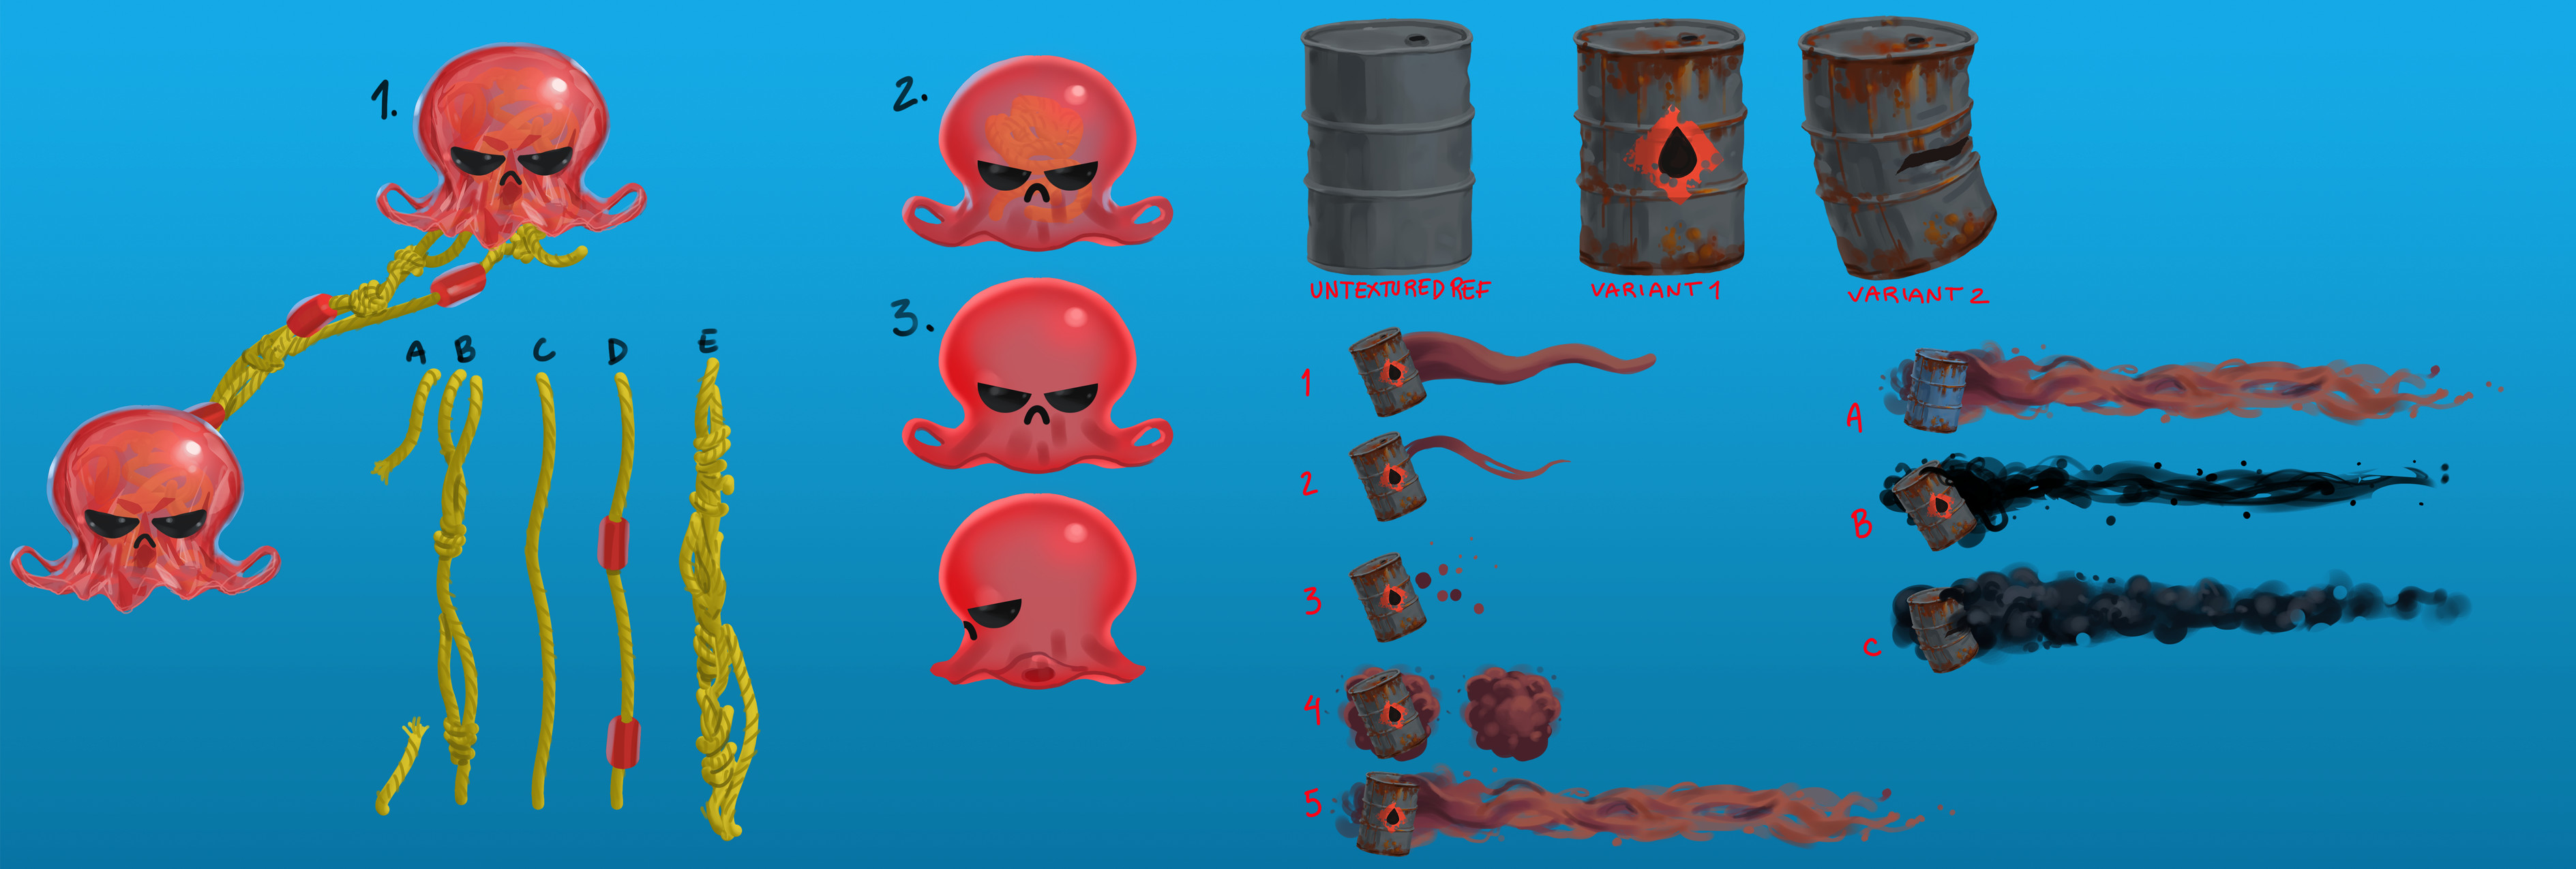 Concepts for enemies and obstacles

Since the theme of the game was pollution, all the enemies and obstacles were made out of man-made objects. Here the jellyfish and and wall are made out of plastic debris and an oil drum respectively.